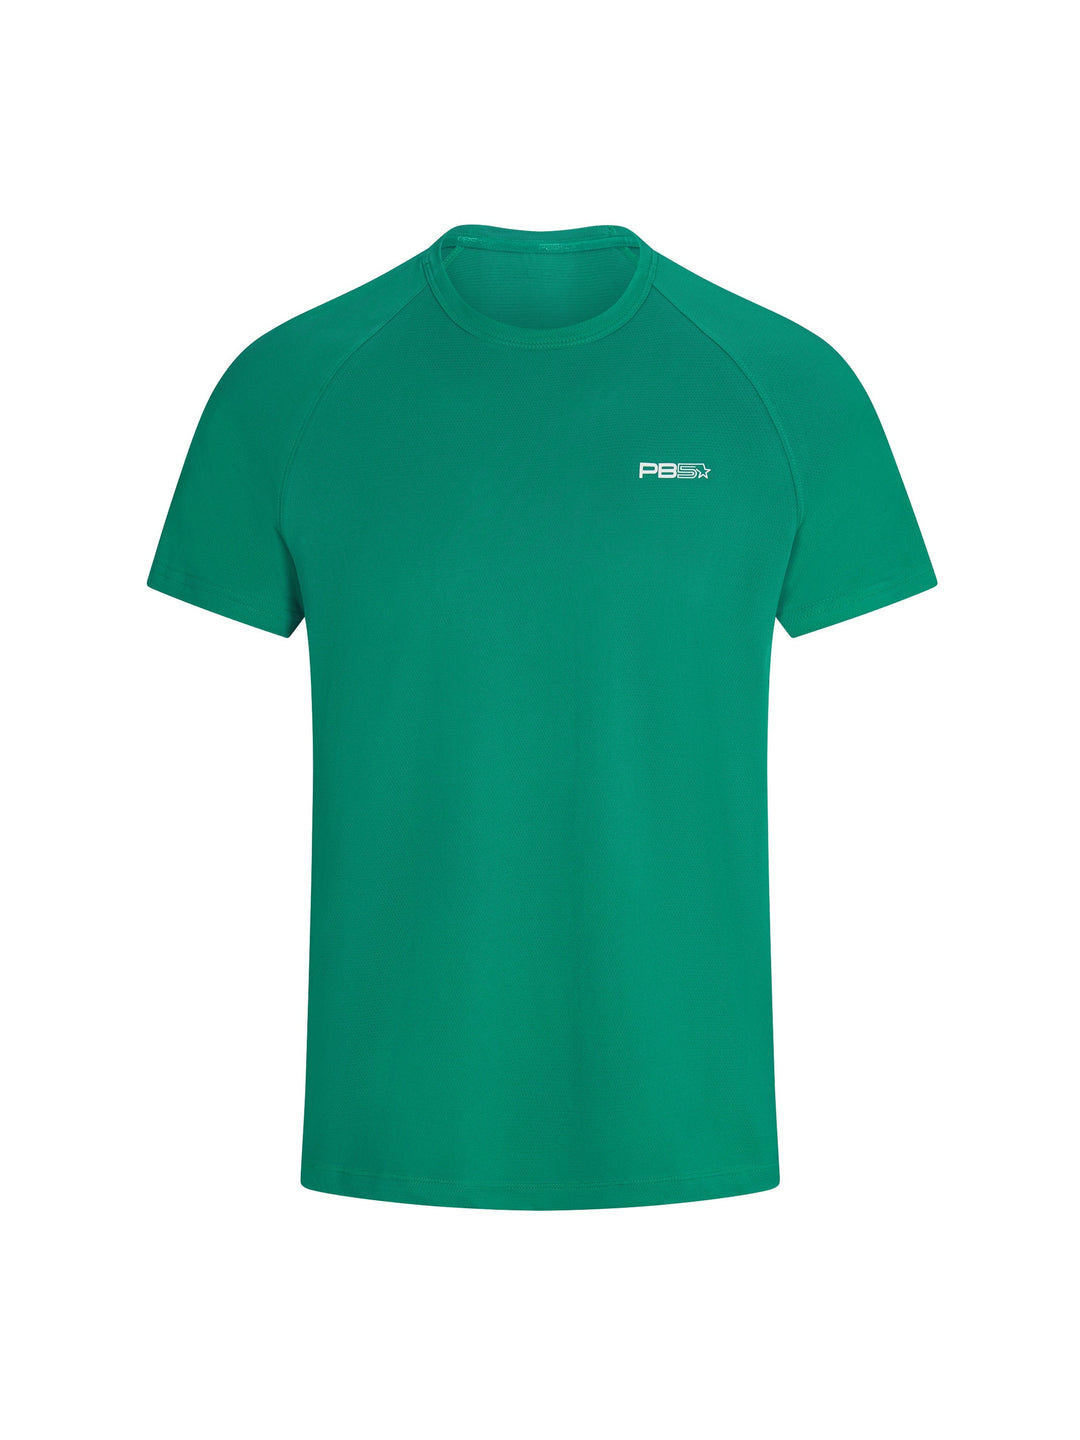 PB5star core performance tee in short sleeve, jade color. Small logo printed on front, upper left side of shirt.